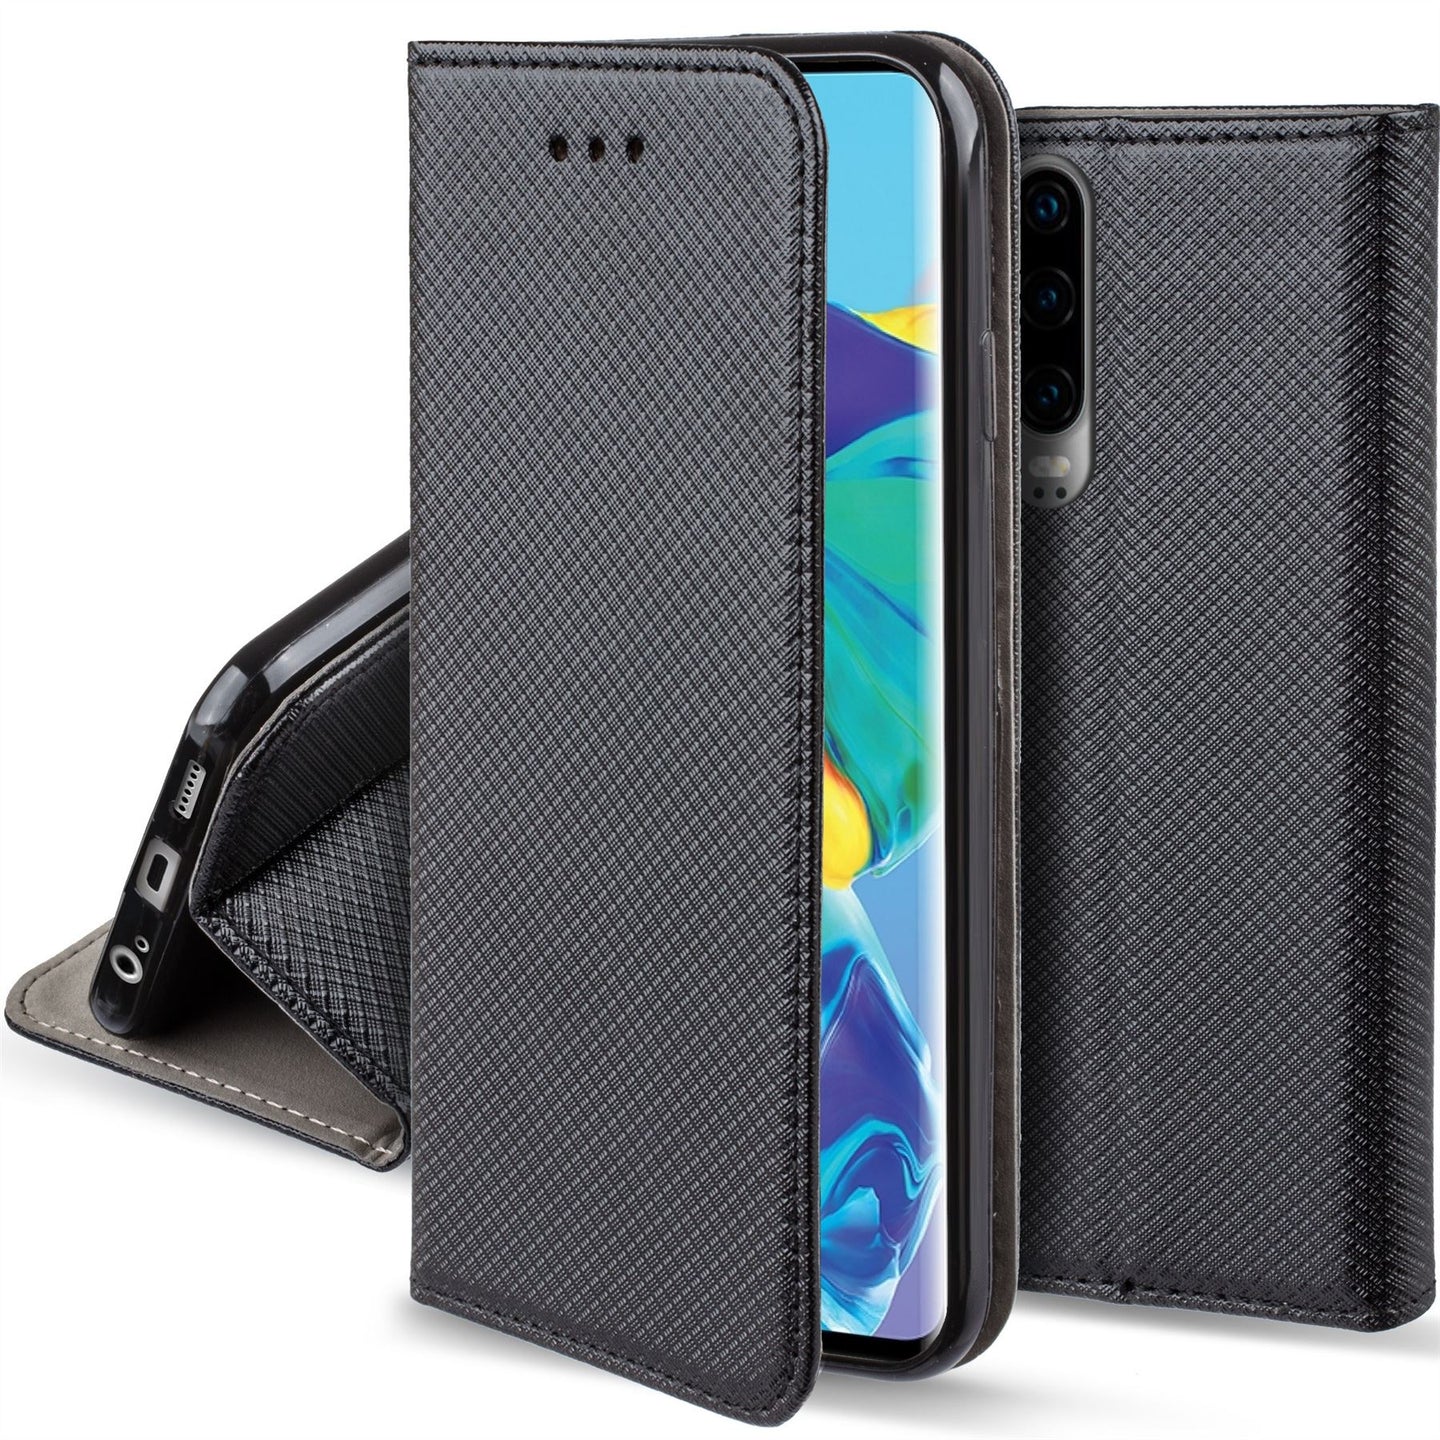 Moozy Case Flip Cover for Huawei P30, Black - Smart Magnetic Flip Case with Card Holder and Stand